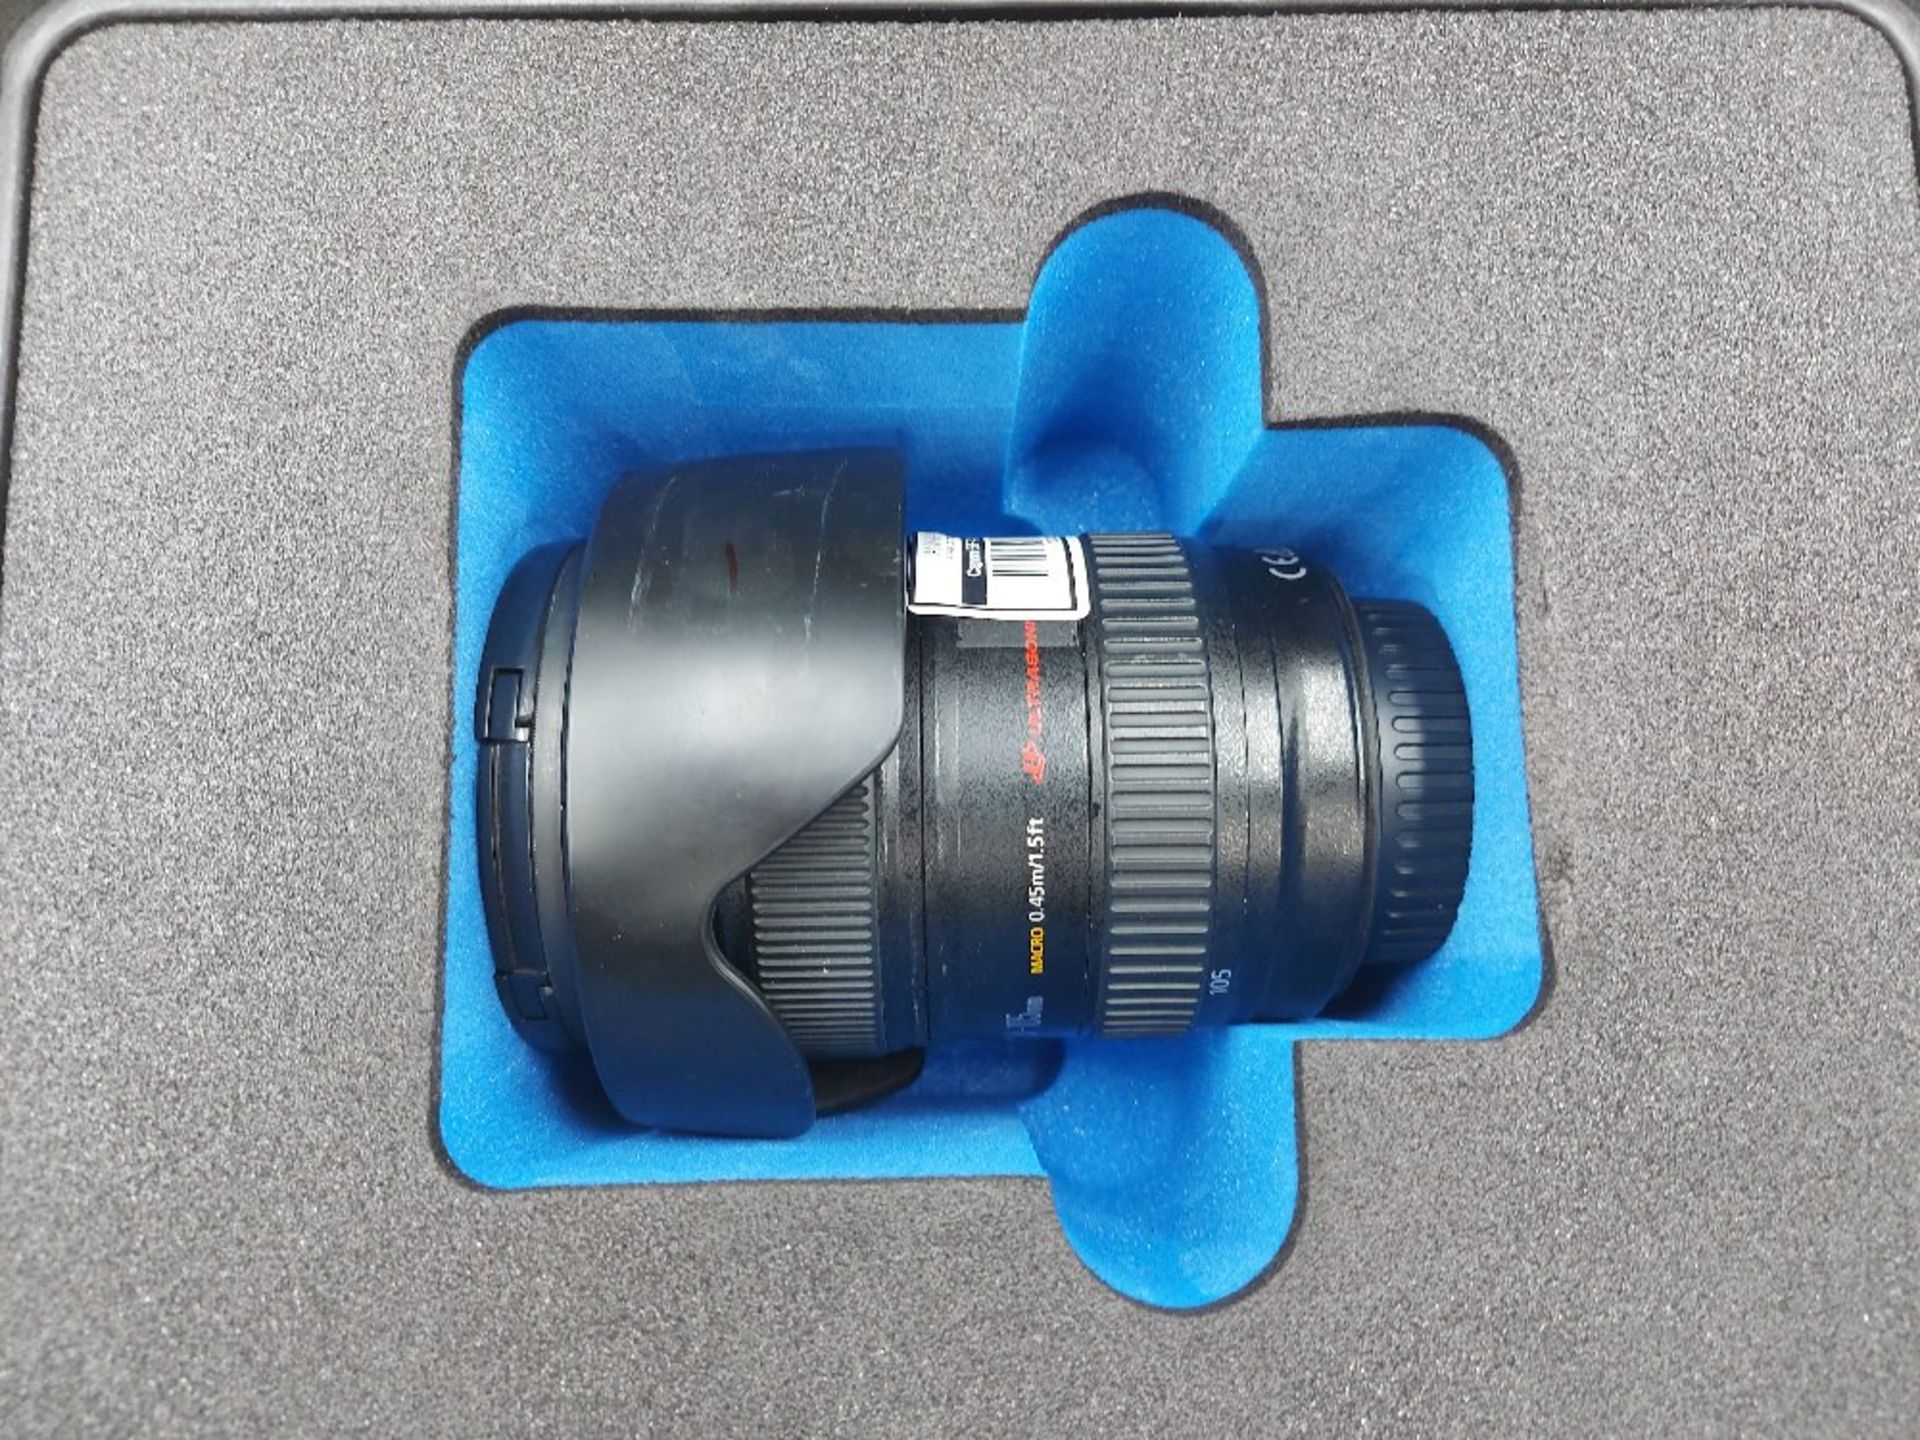 Canon EF 24-105mm 1:4 L IS USM Zoom Lens & Canon EW-83H Lens Hood - Image 5 of 6